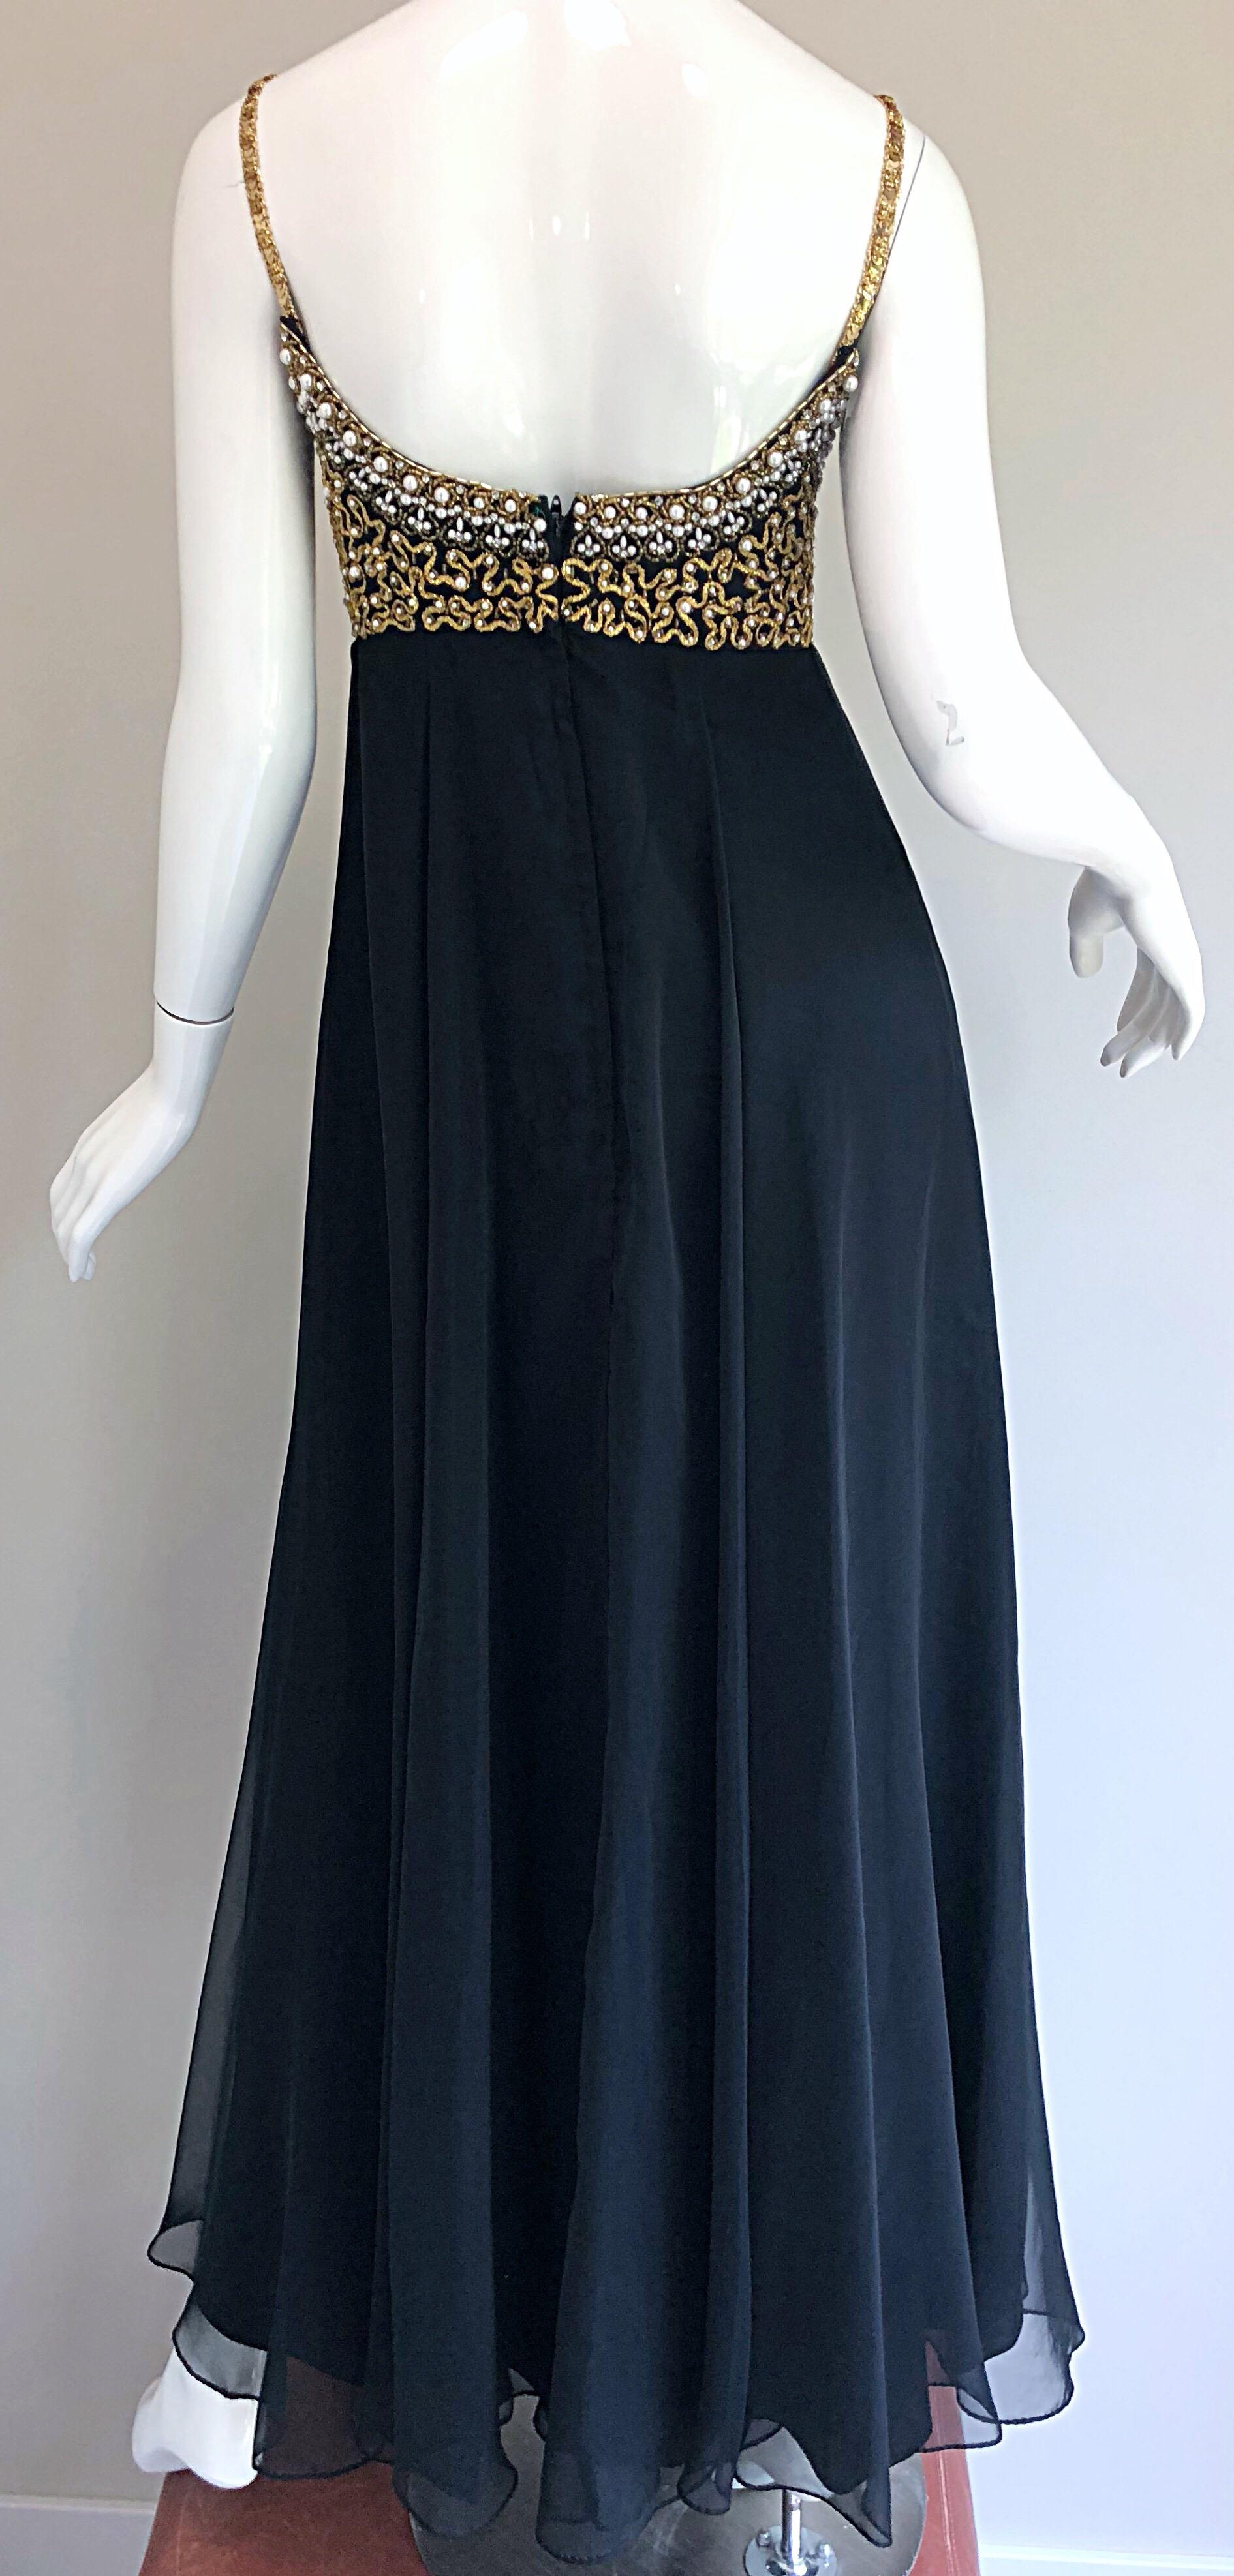 1970s Black + Gold Pearl + Rhinestone Encrusted Vintage 70s Chiffon Evening Gown For Sale 5